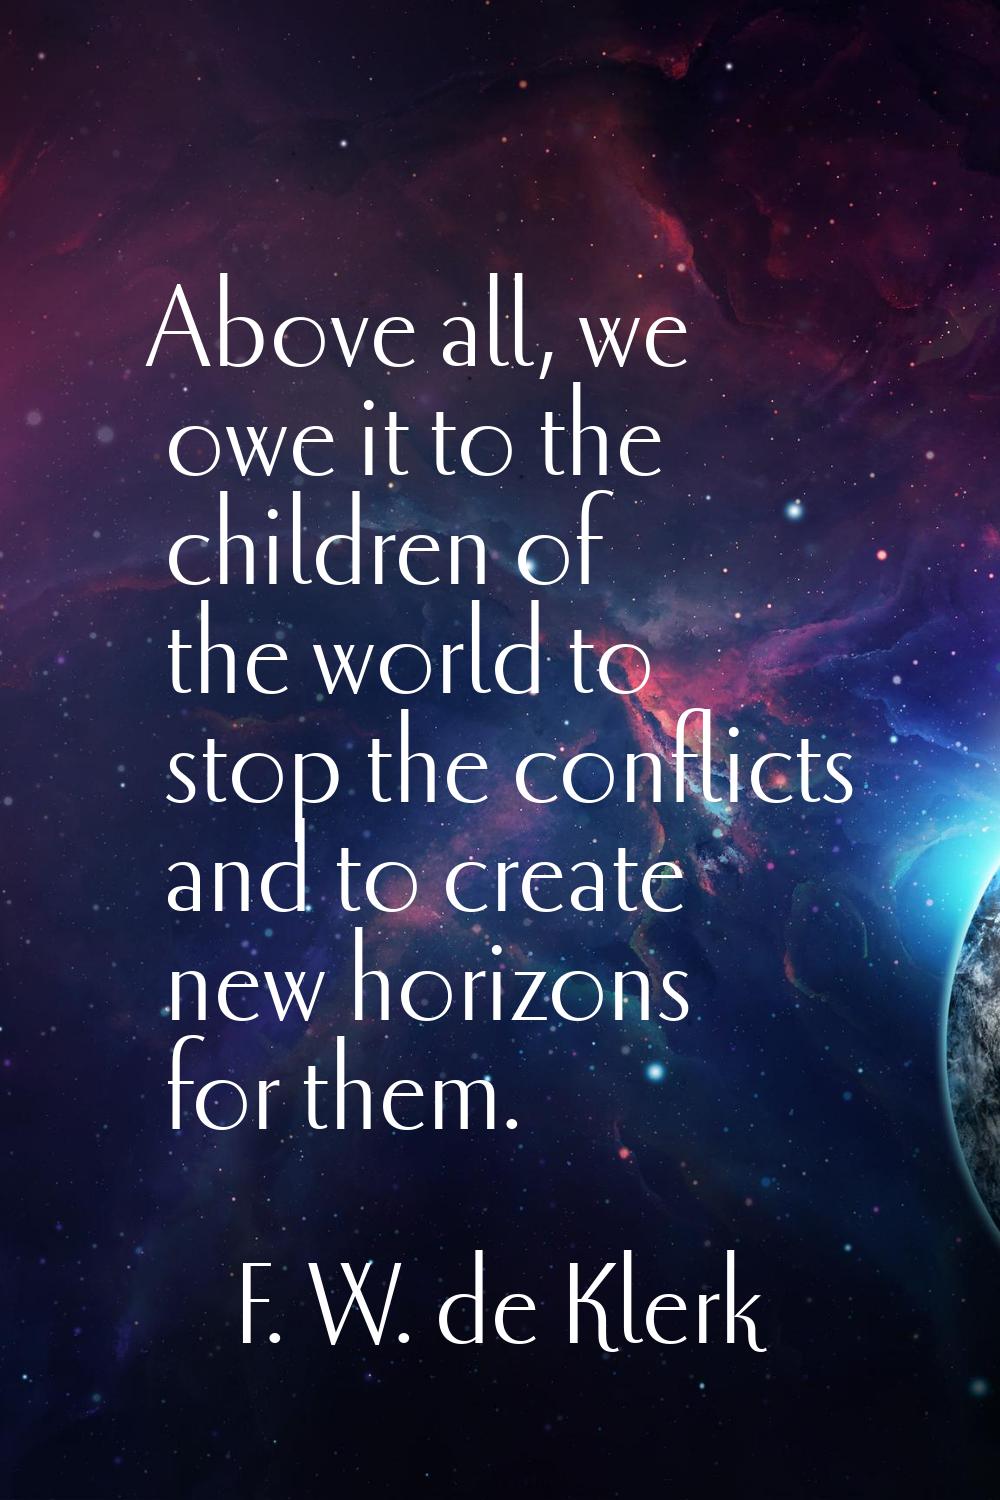 Above all, we owe it to the children of the world to stop the conflicts and to create new horizons 